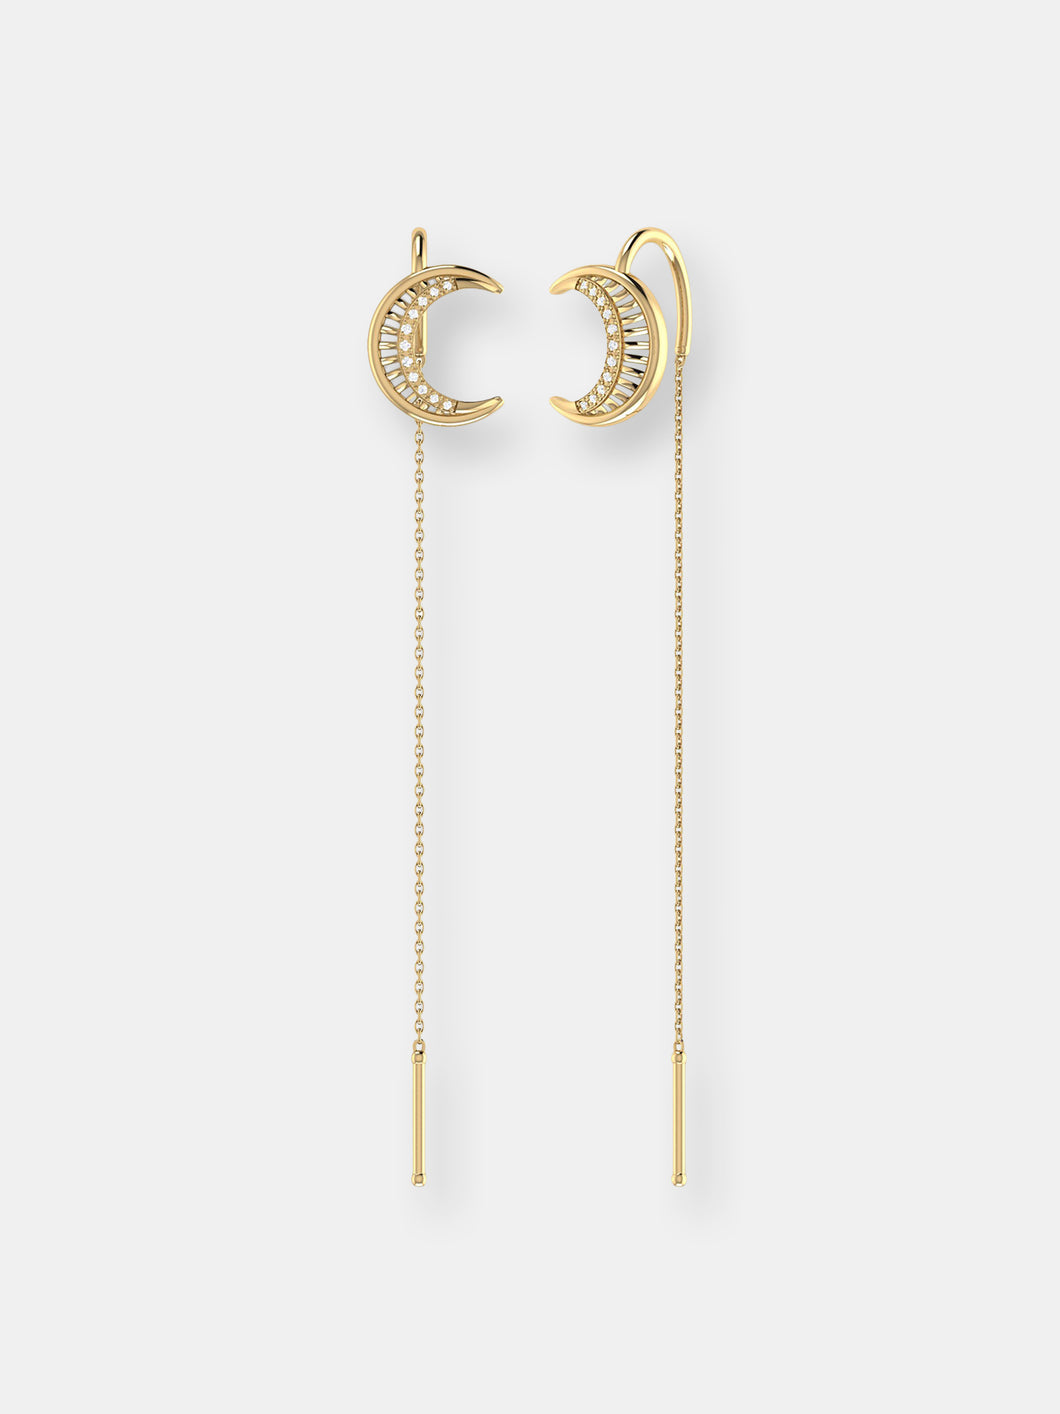 Moon Crescent Tack-In Diamond Earrings in 14K Yellow Gold Vermeil on Sterling Silver